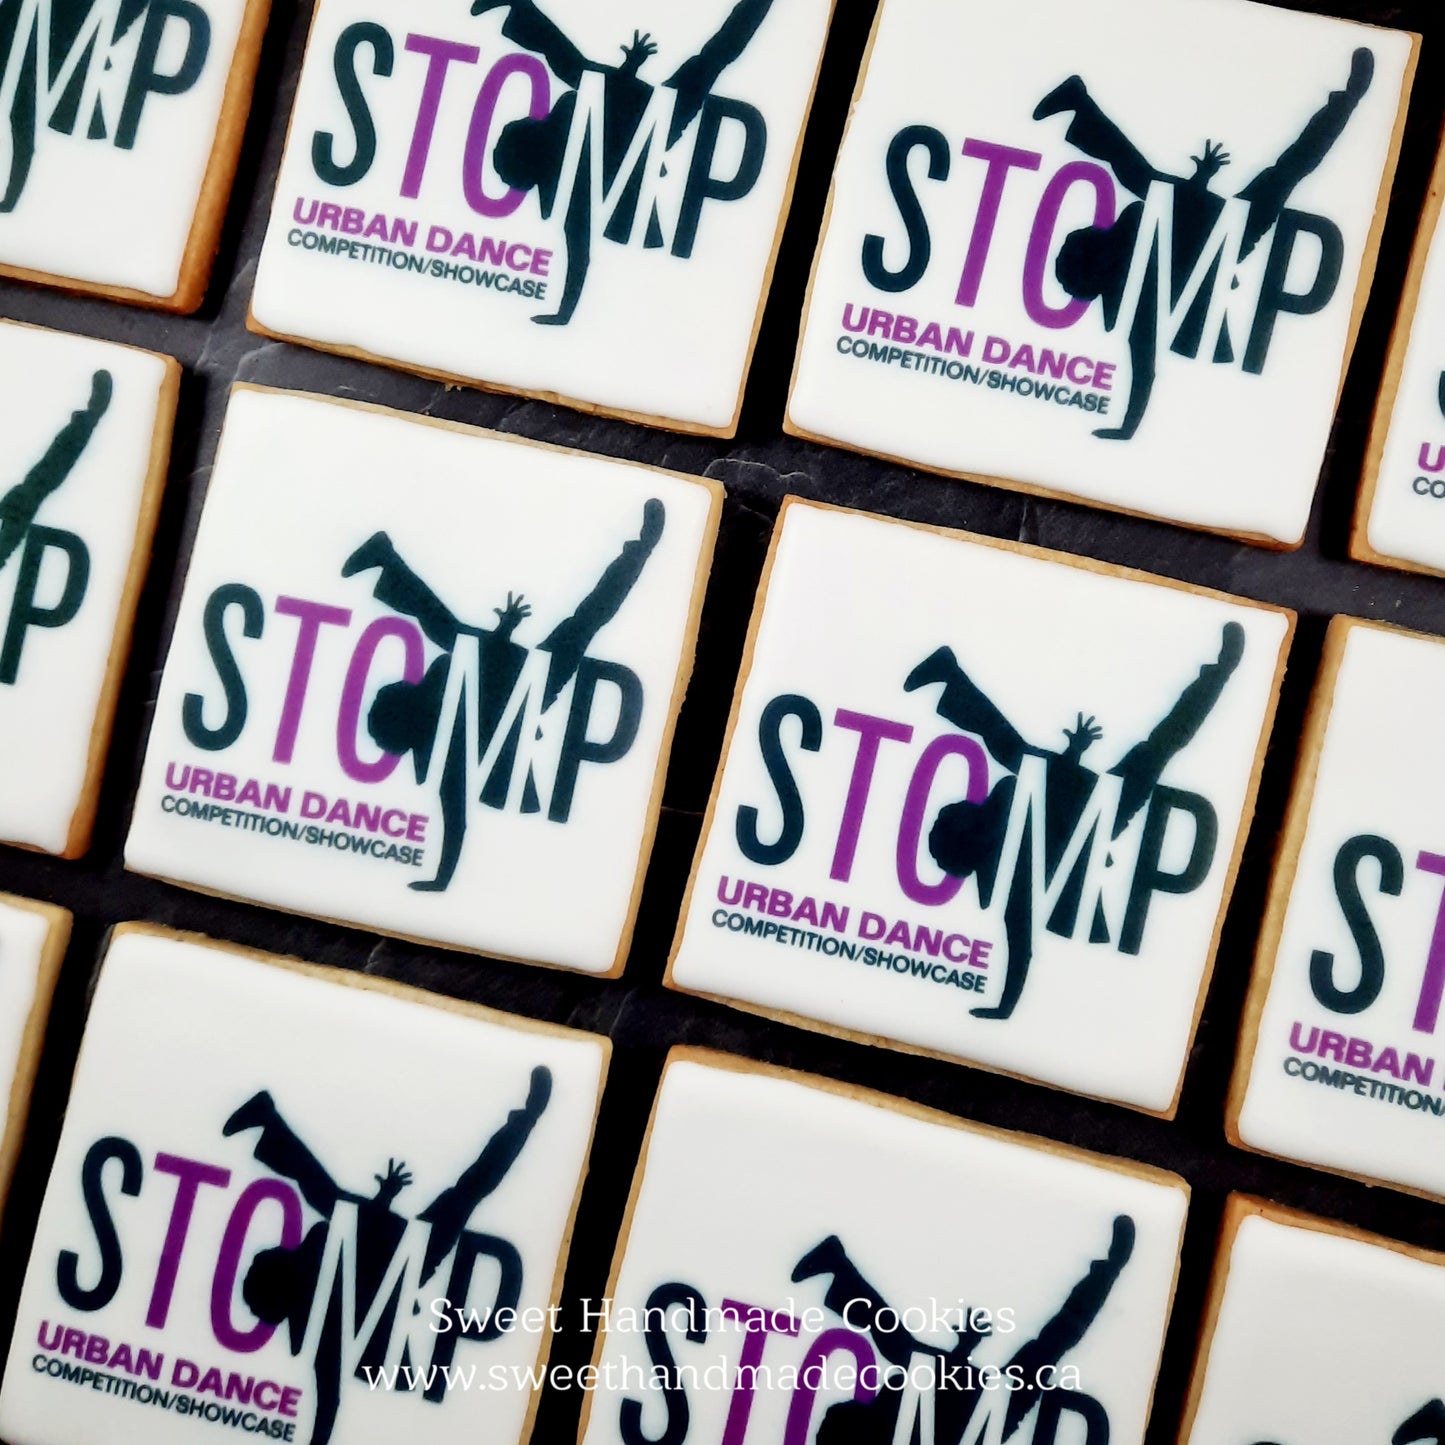 Logo Cookies - Stomp Urban Dance Competition